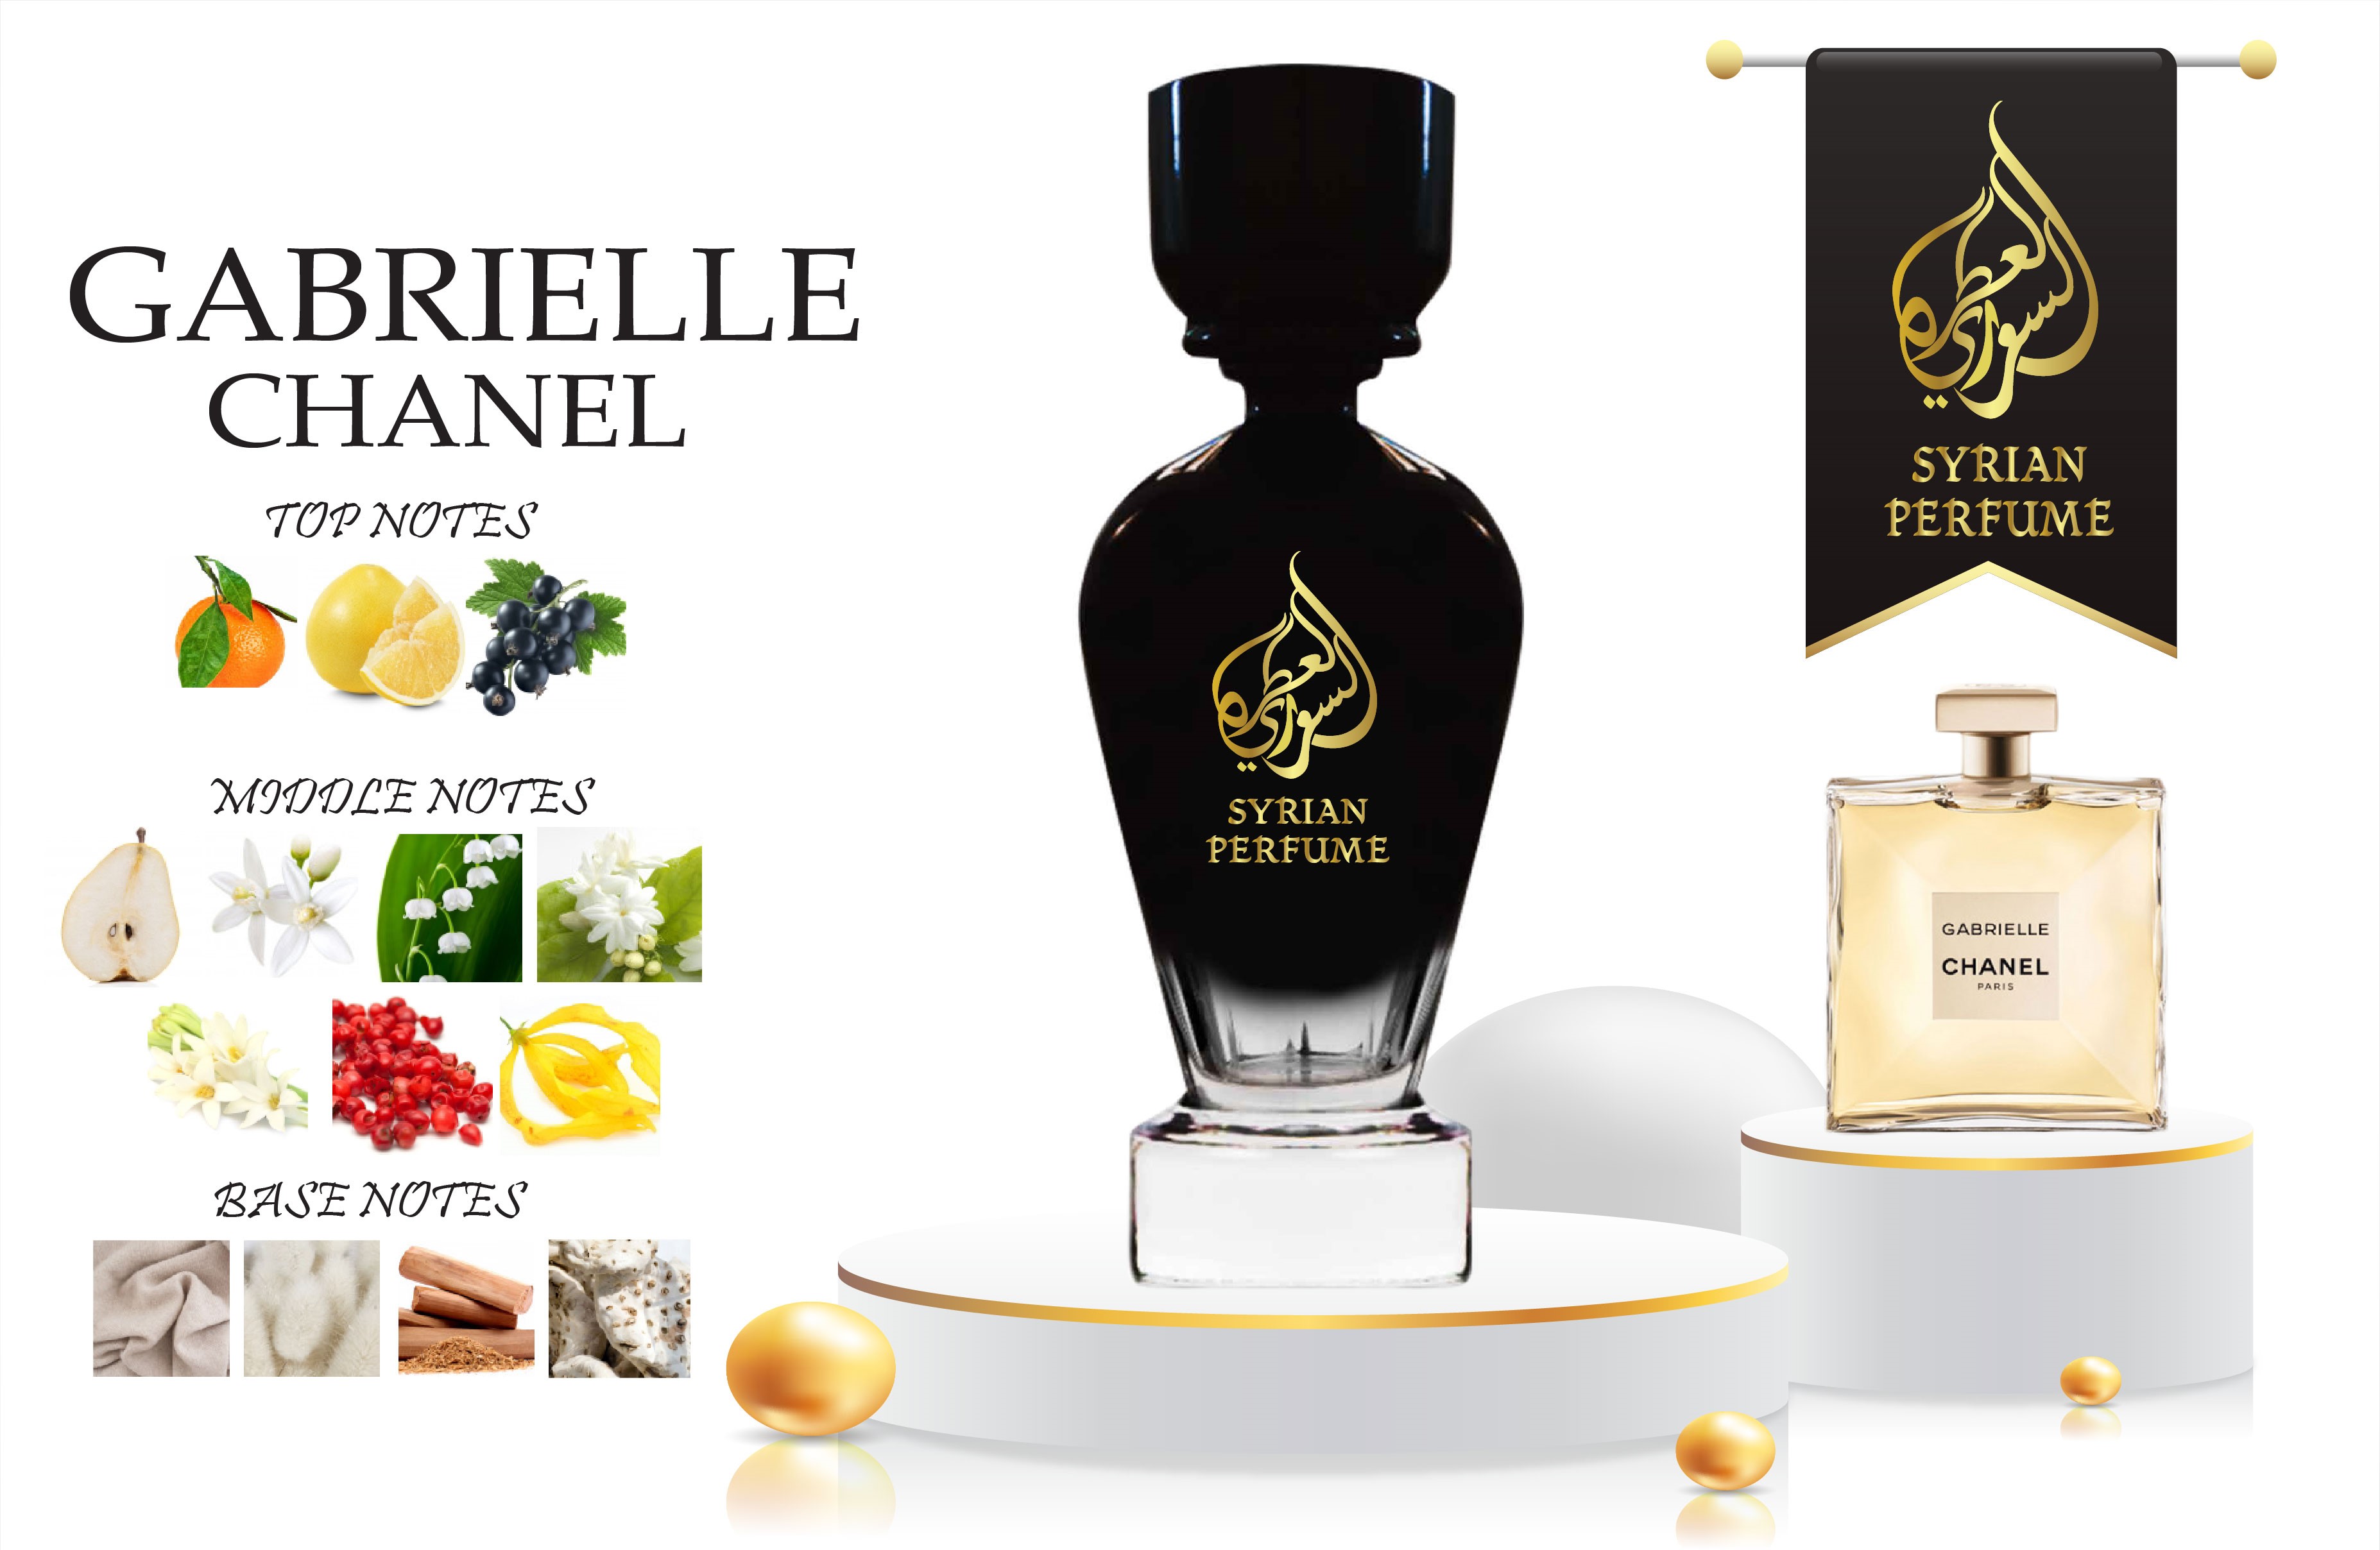 Syrian Perfume Gabrielle Chanel 75ml For Her